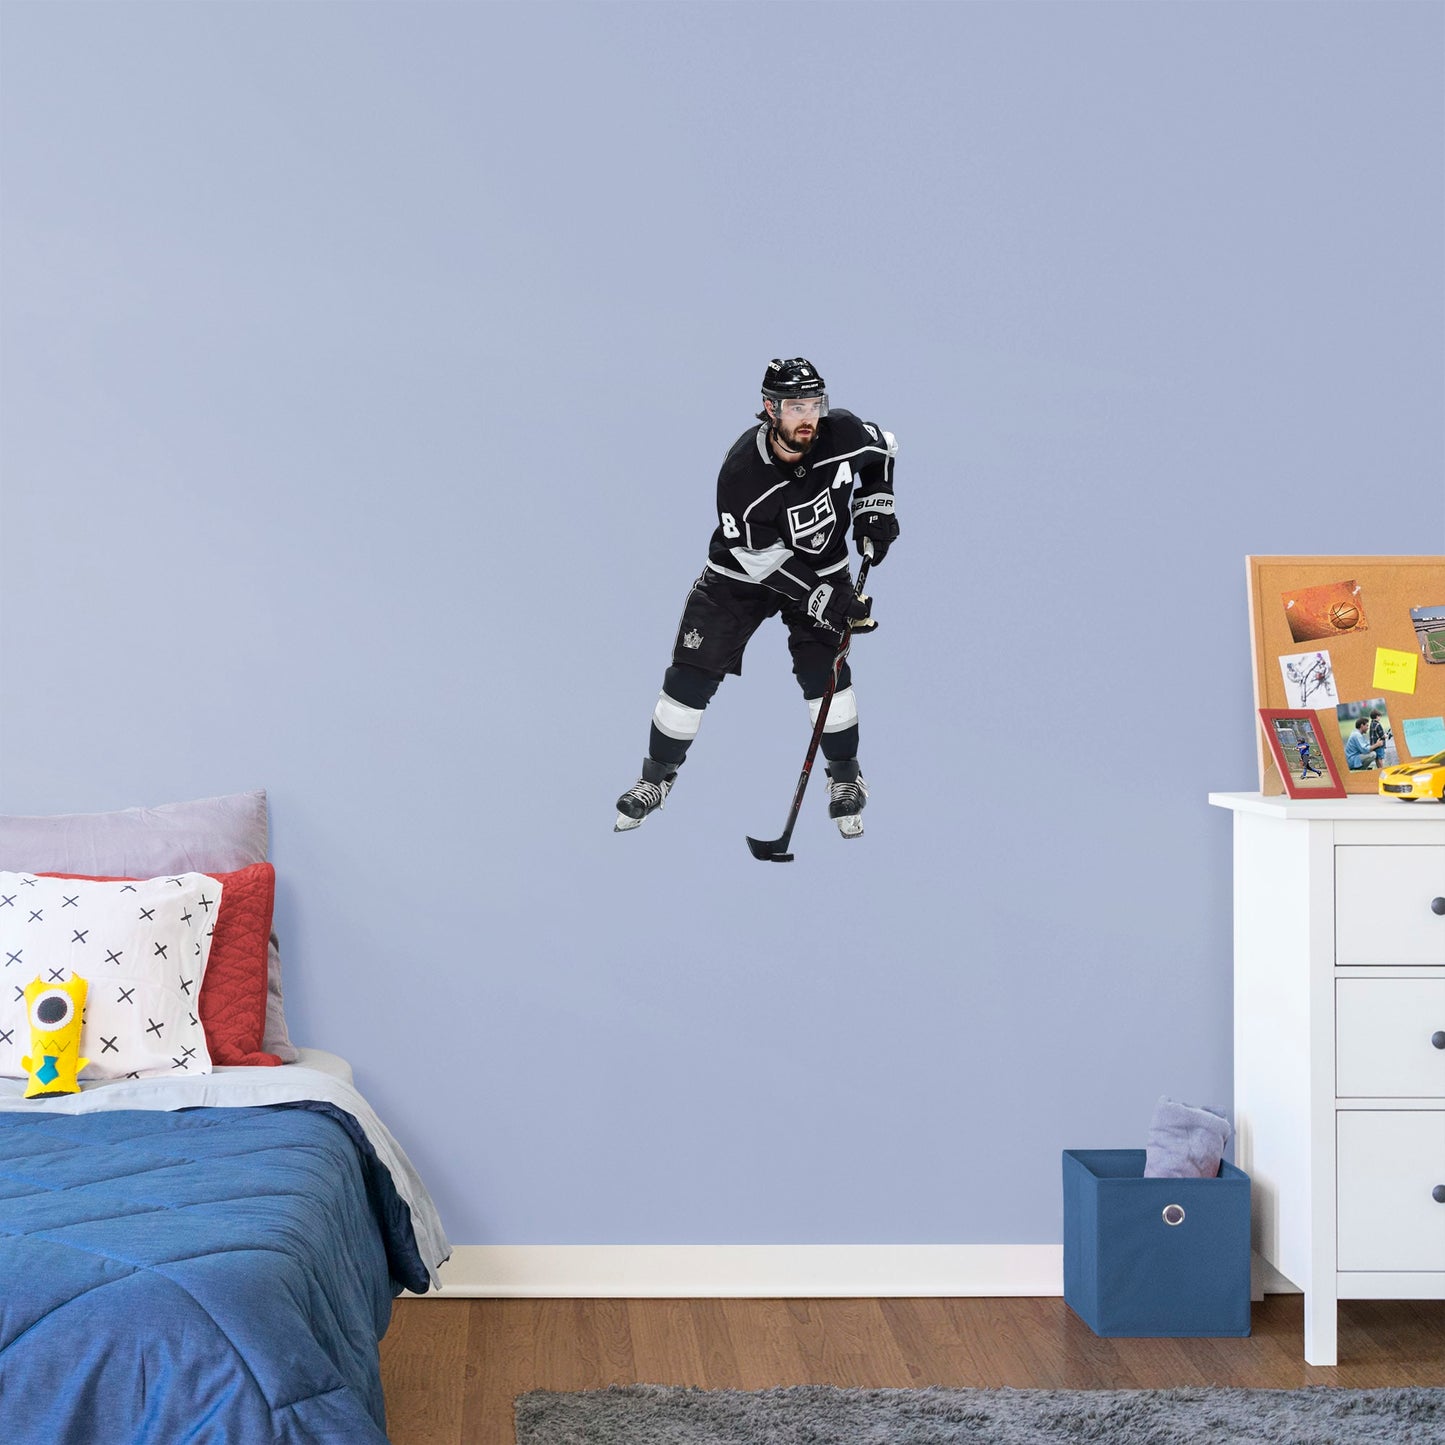 X-Large Athlete + 2 Decals (22"W x 38"H) Drew Doughty has been a star from the very start and now Los Angeles Kings fanatics can bring him to life in your own home with this Officially Licensed NHL Removable Wall Decal. Shown here in action in the Kings home uniform, this wall decal is durable and high quality and is sure to bring the action to your bedroom, office, or fan room. 